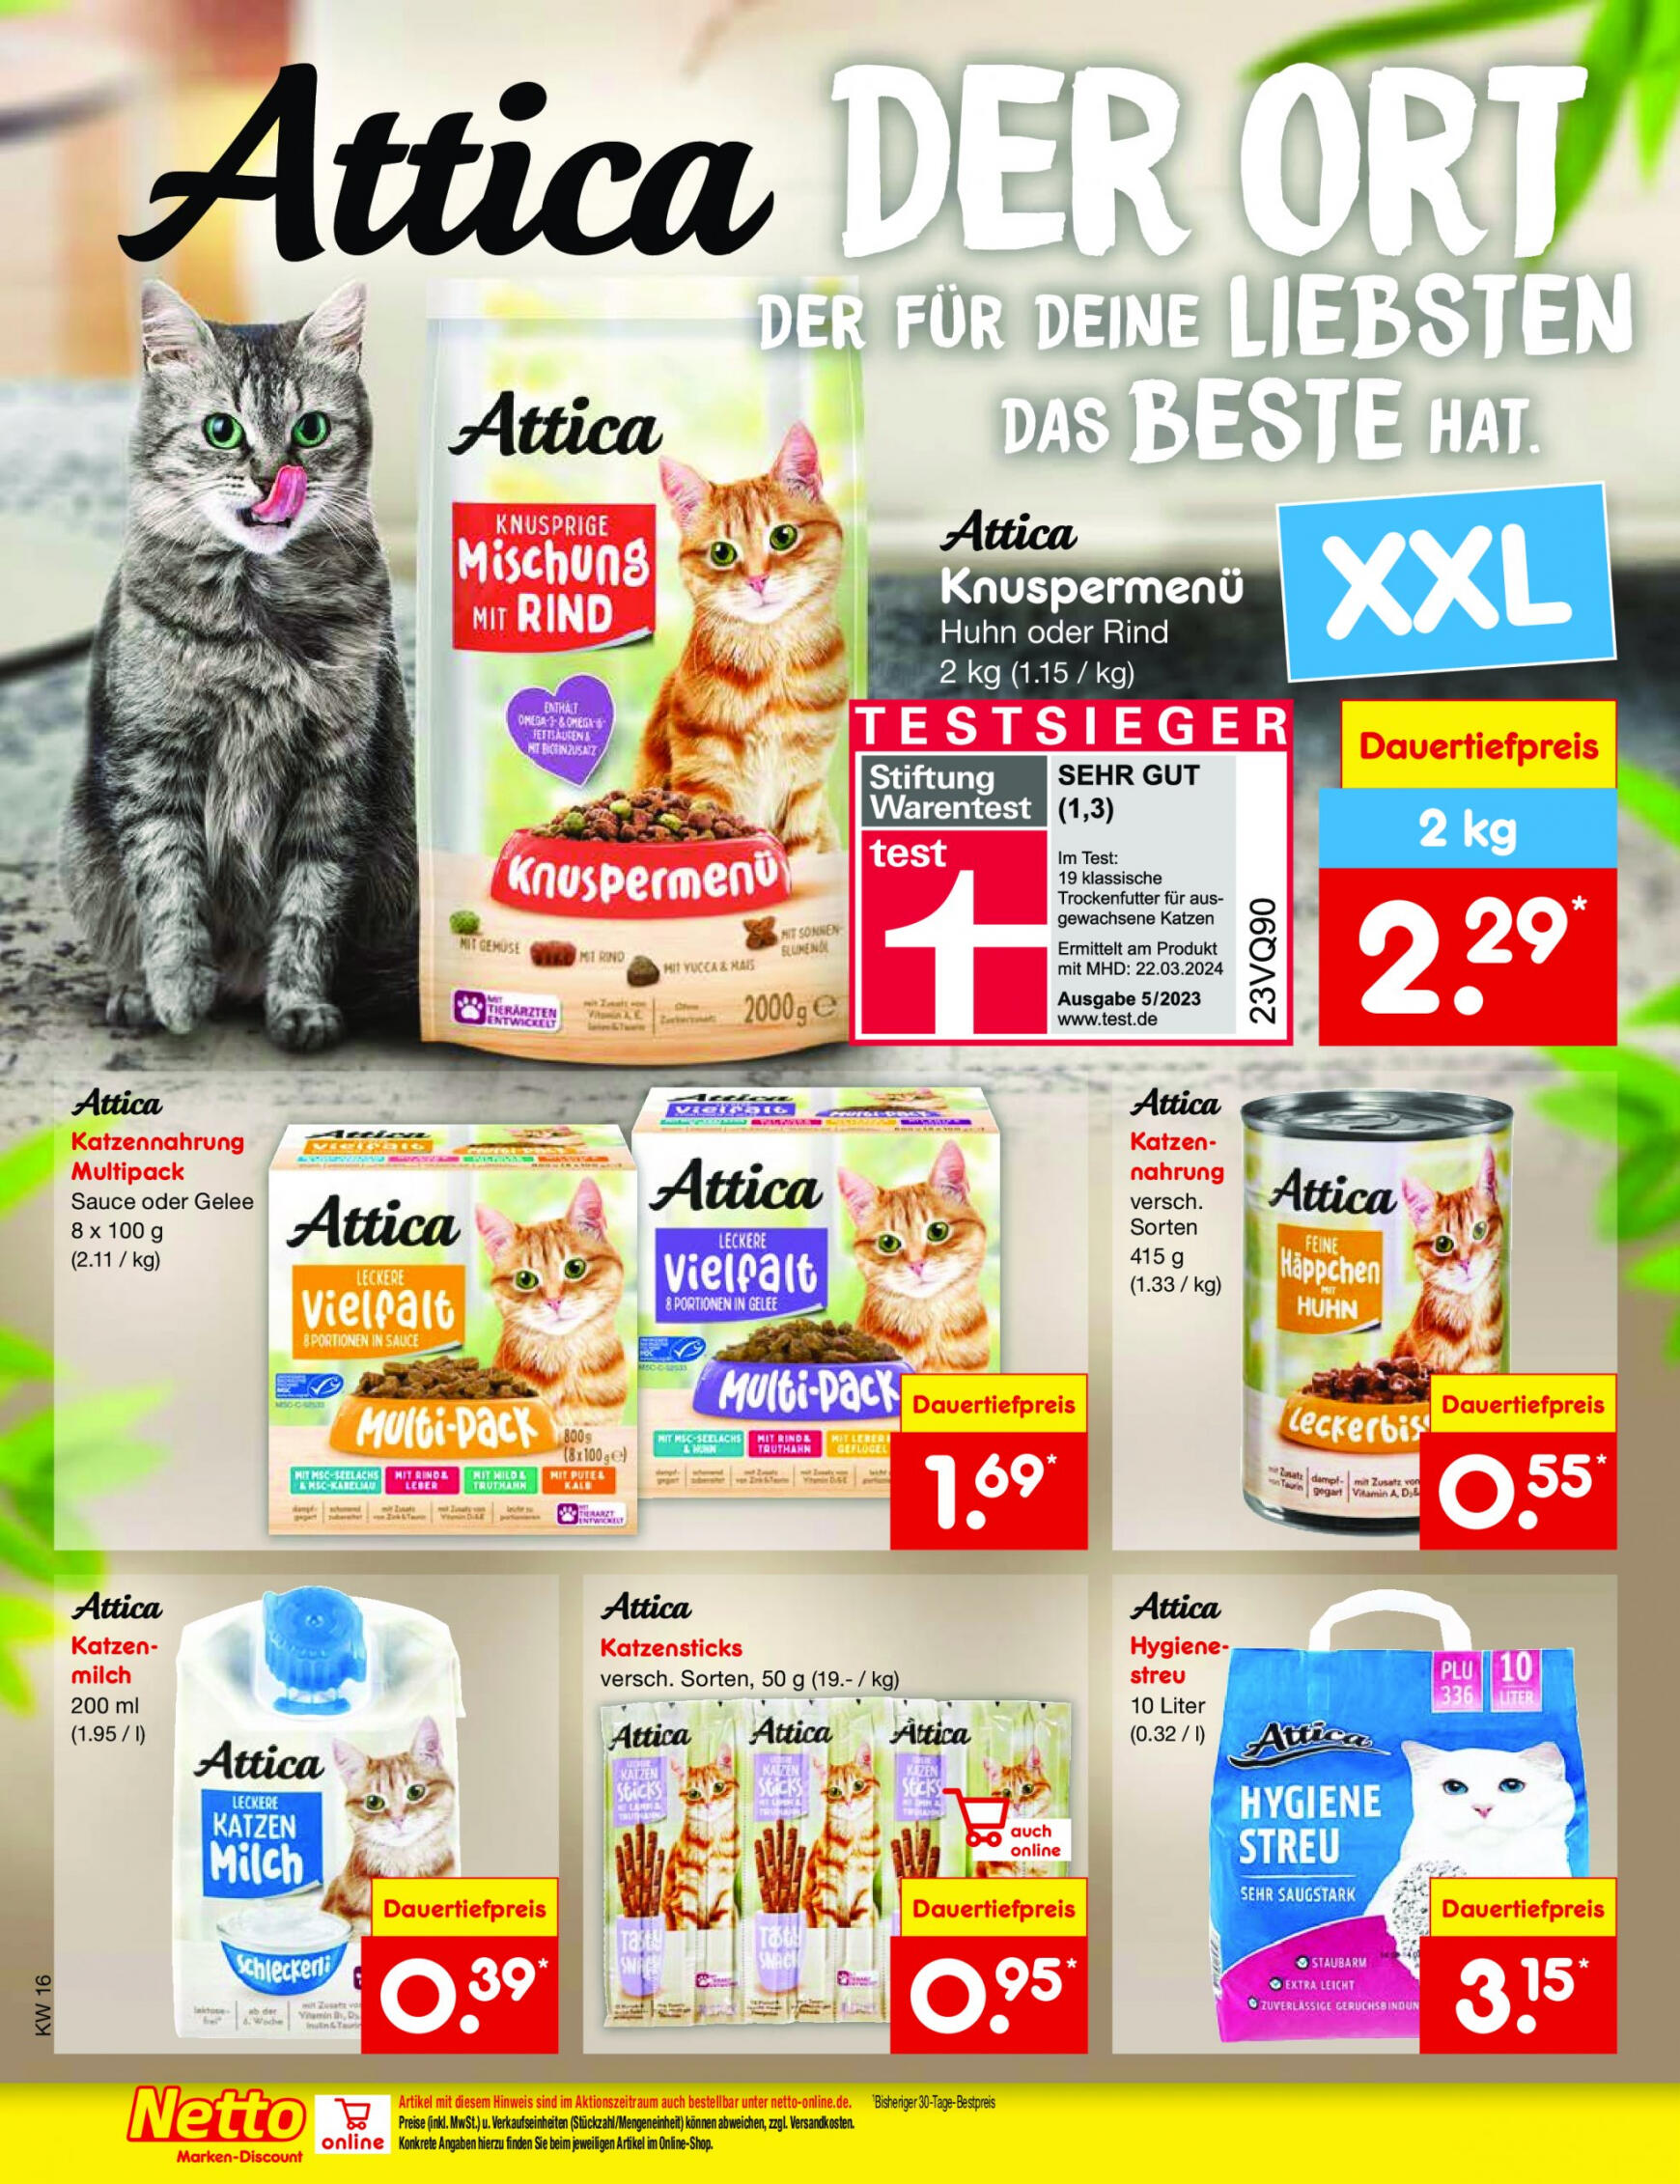 netto - Flyer Netto aktuell 15.04. - 20.04. - page: 47